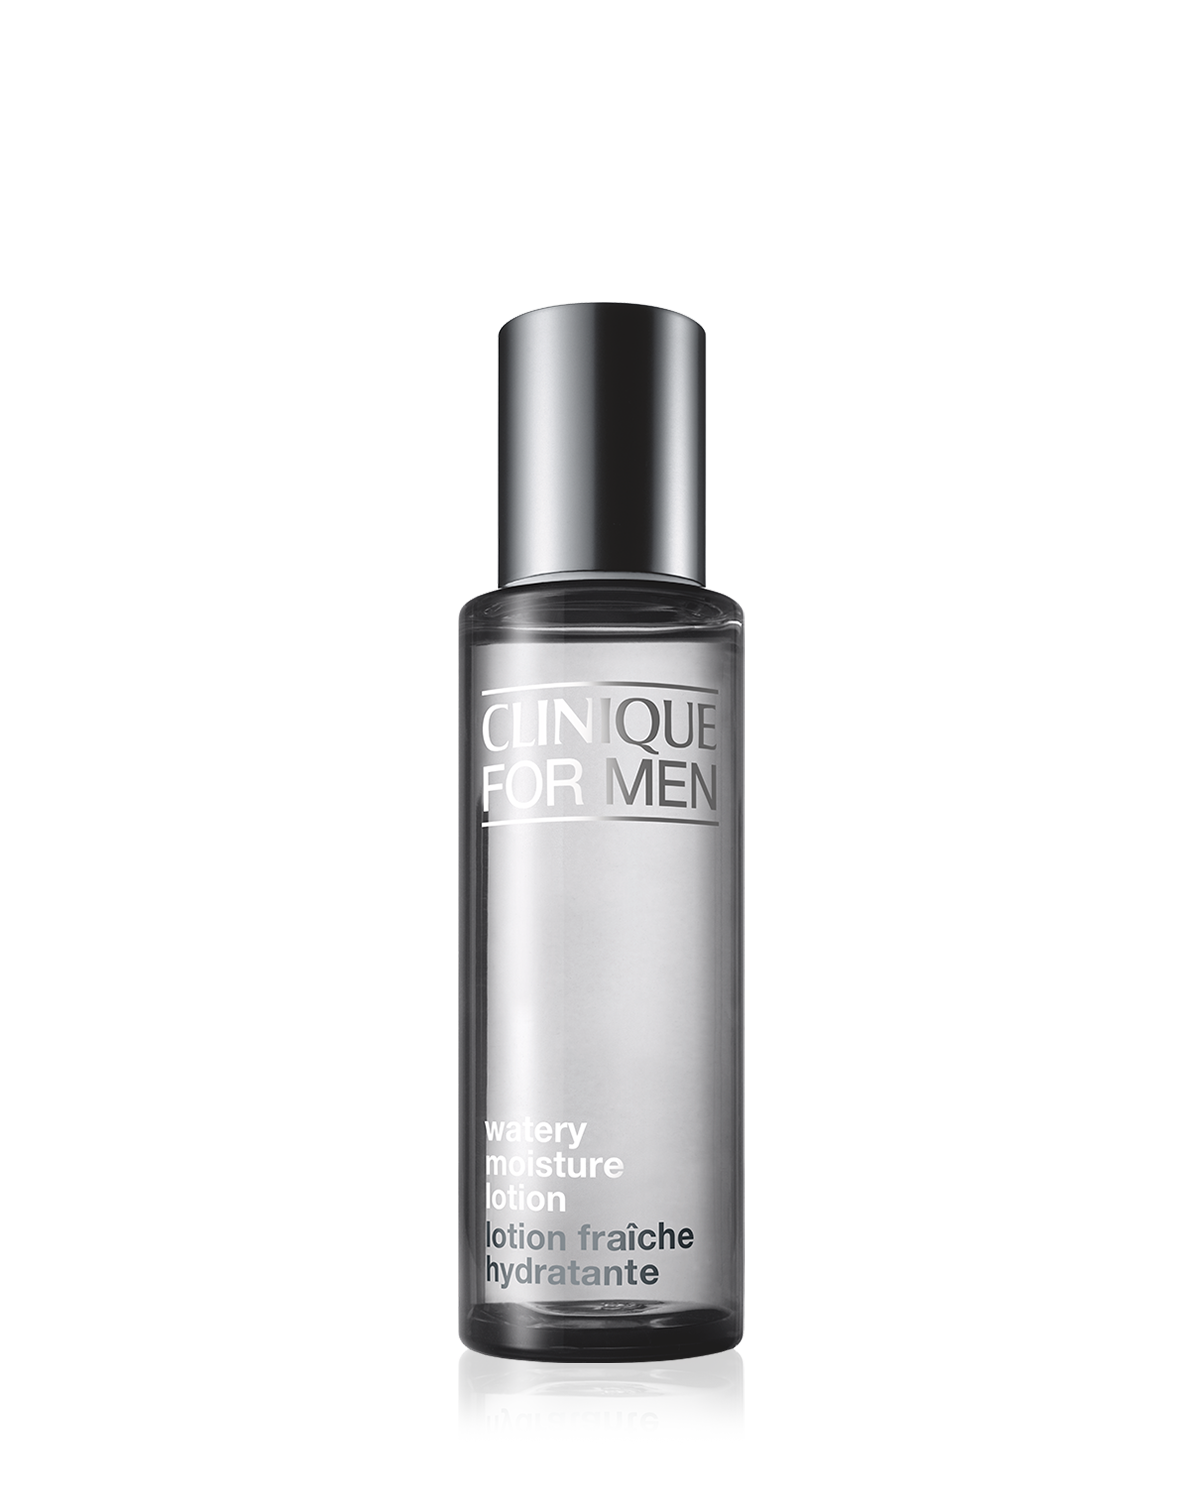 NEW Clinique for Men Watery Moisture Lotion